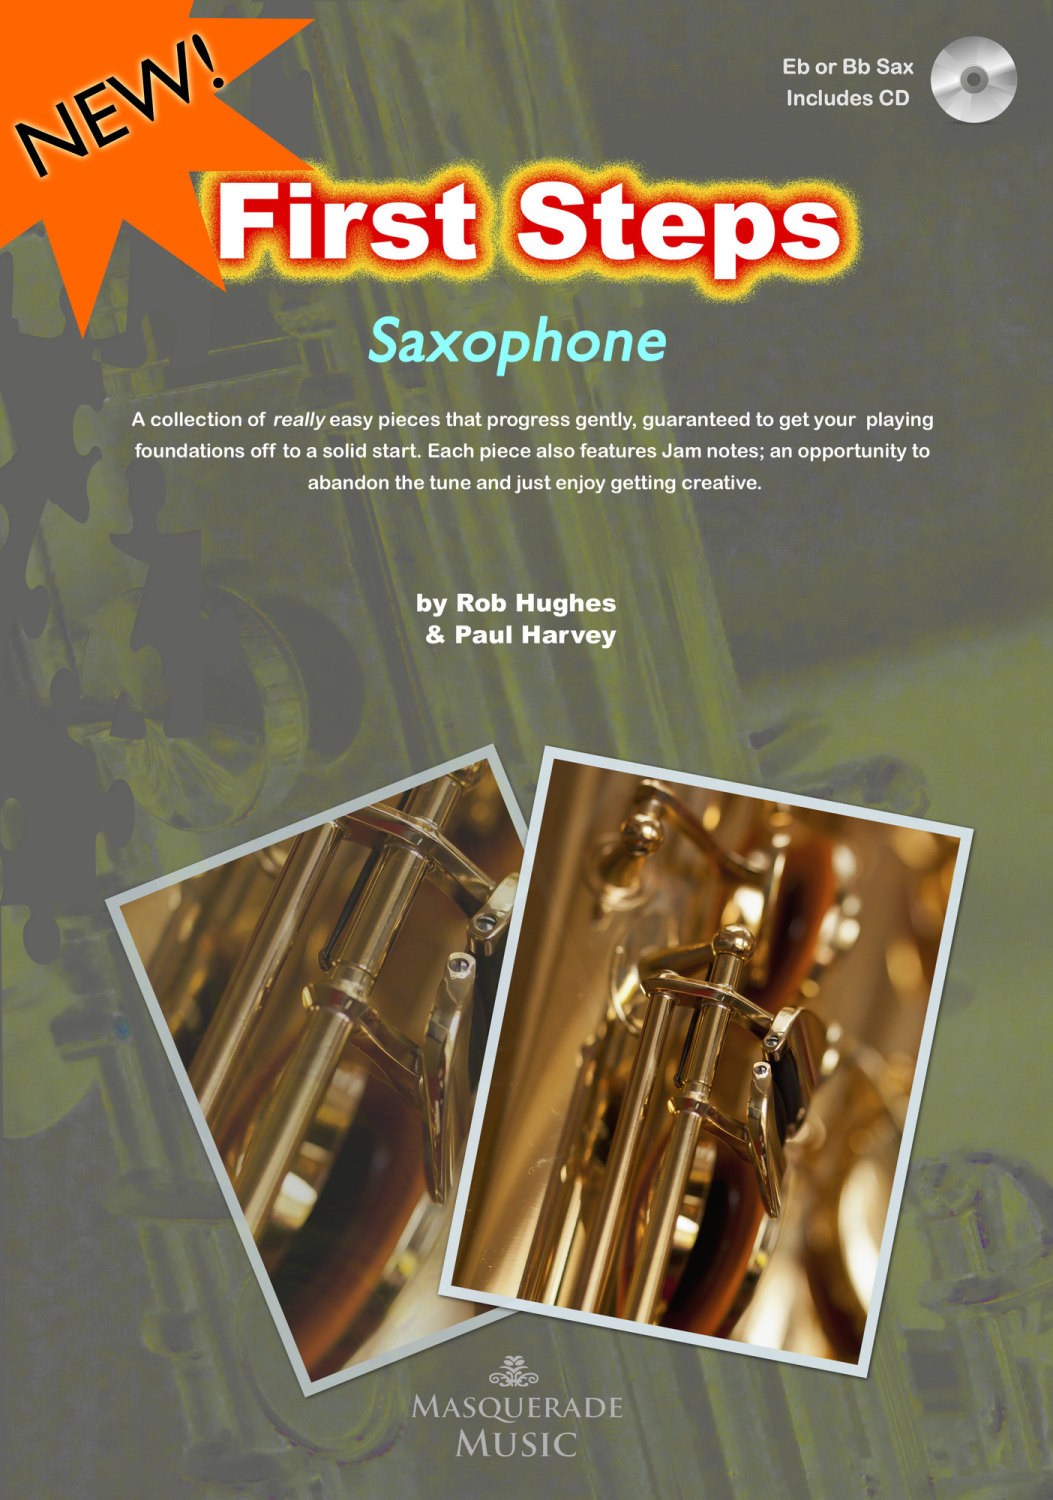 First Steps Saxophone Pre-order price Special!